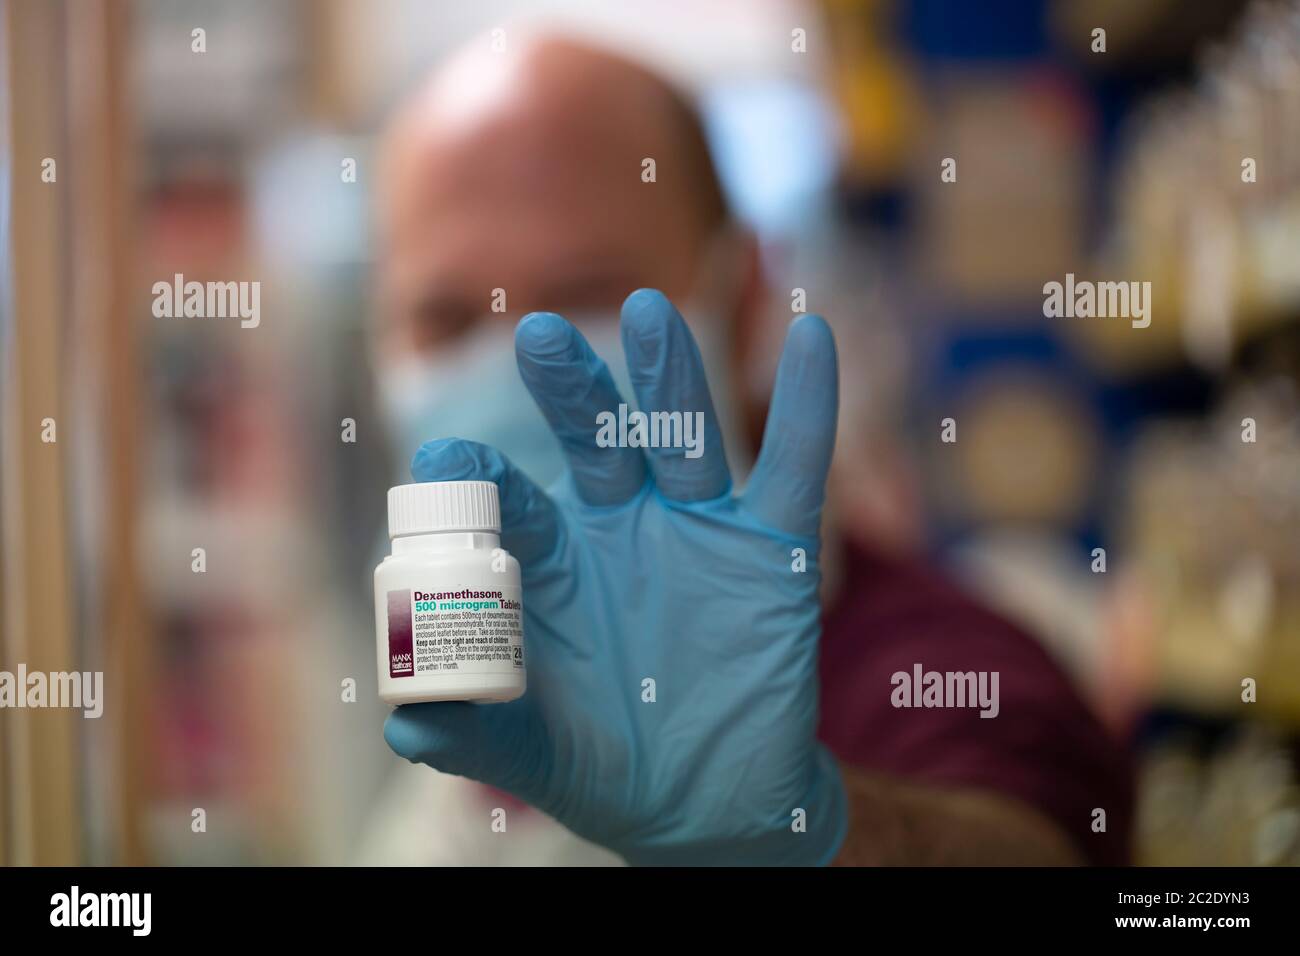 (200617) -- MANCHESTER, June 17, 2020 (Xinhua) -- A staff member holds packages of dexamethasone at a pharmacy in Manchester, Britain, on June 17, 2020. With the COVID-19 pandemic imposing huge impact on people's daily life in Britain and other parts of the world, scientists are racing against time to get deeper understanding of the novel coronavirus while accelerating the development of new treatments and vaccines. Credit: Xinhua/Alamy Live News Stock Photo